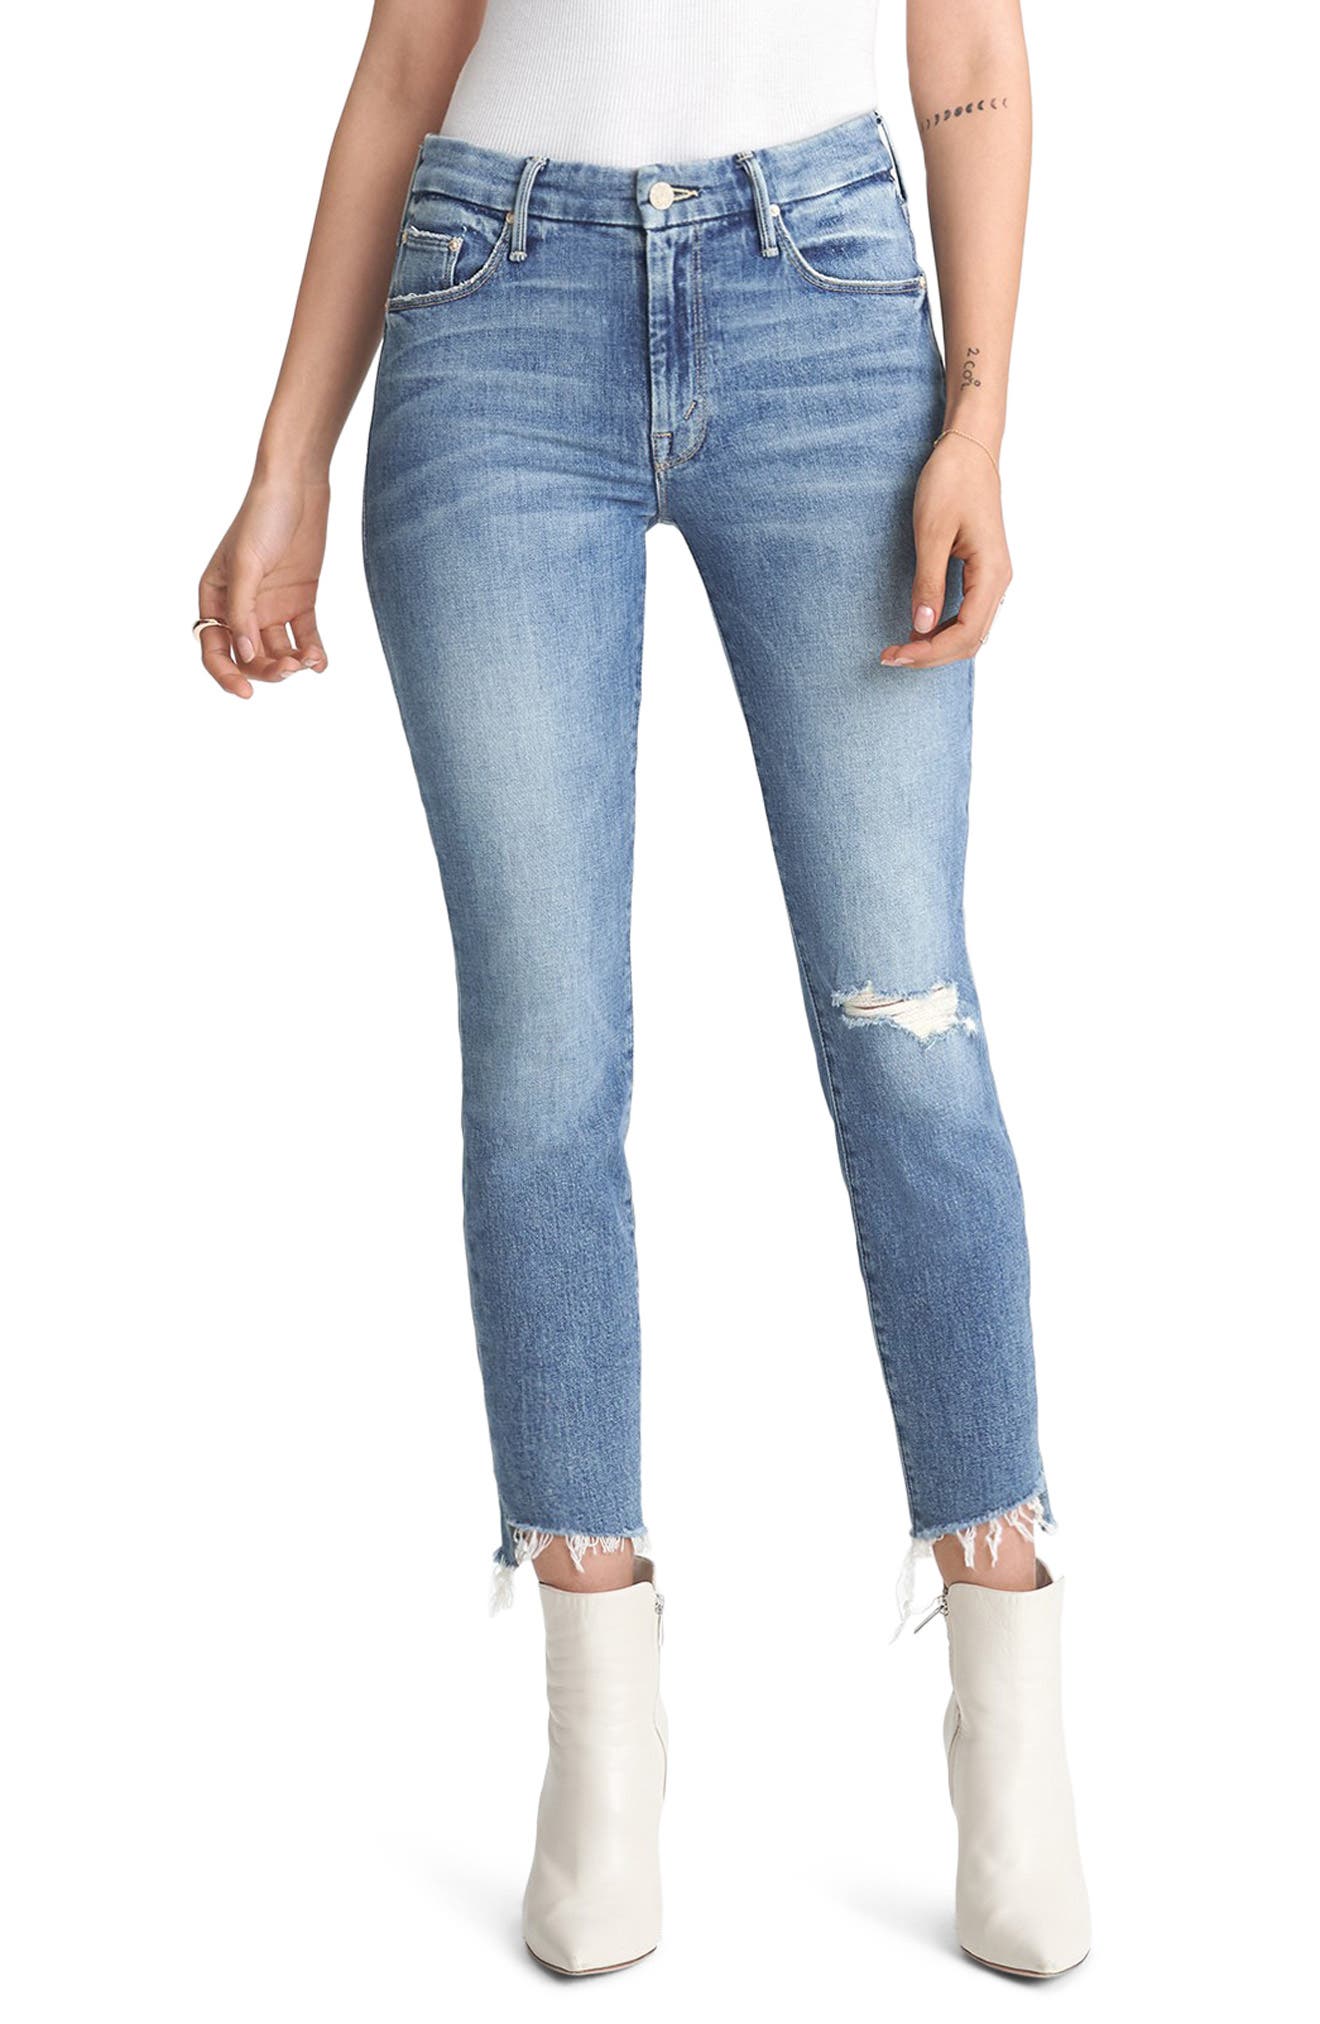 women's frayed ankle jeans